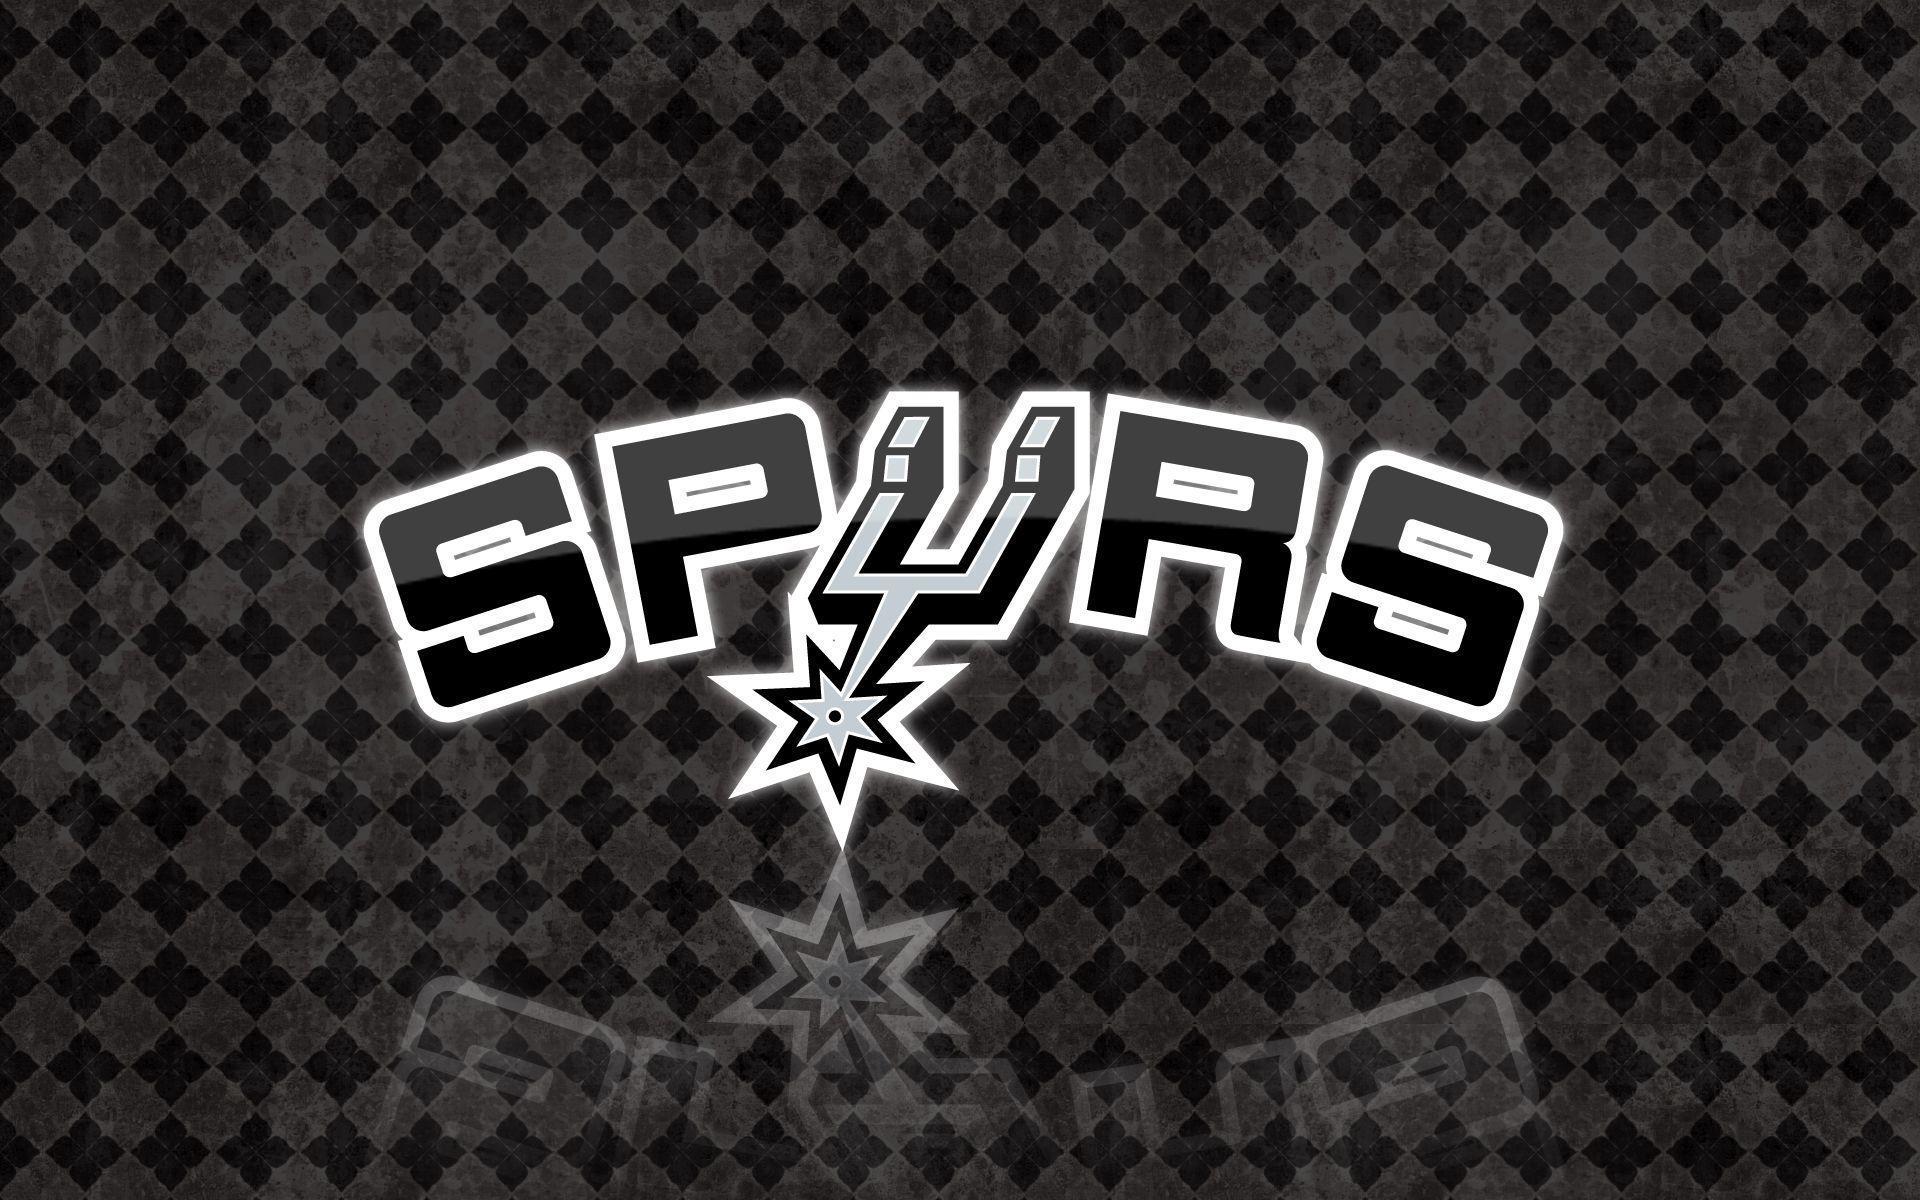 San Antonio Spurs Wallpaper High Resolution and Quality Download